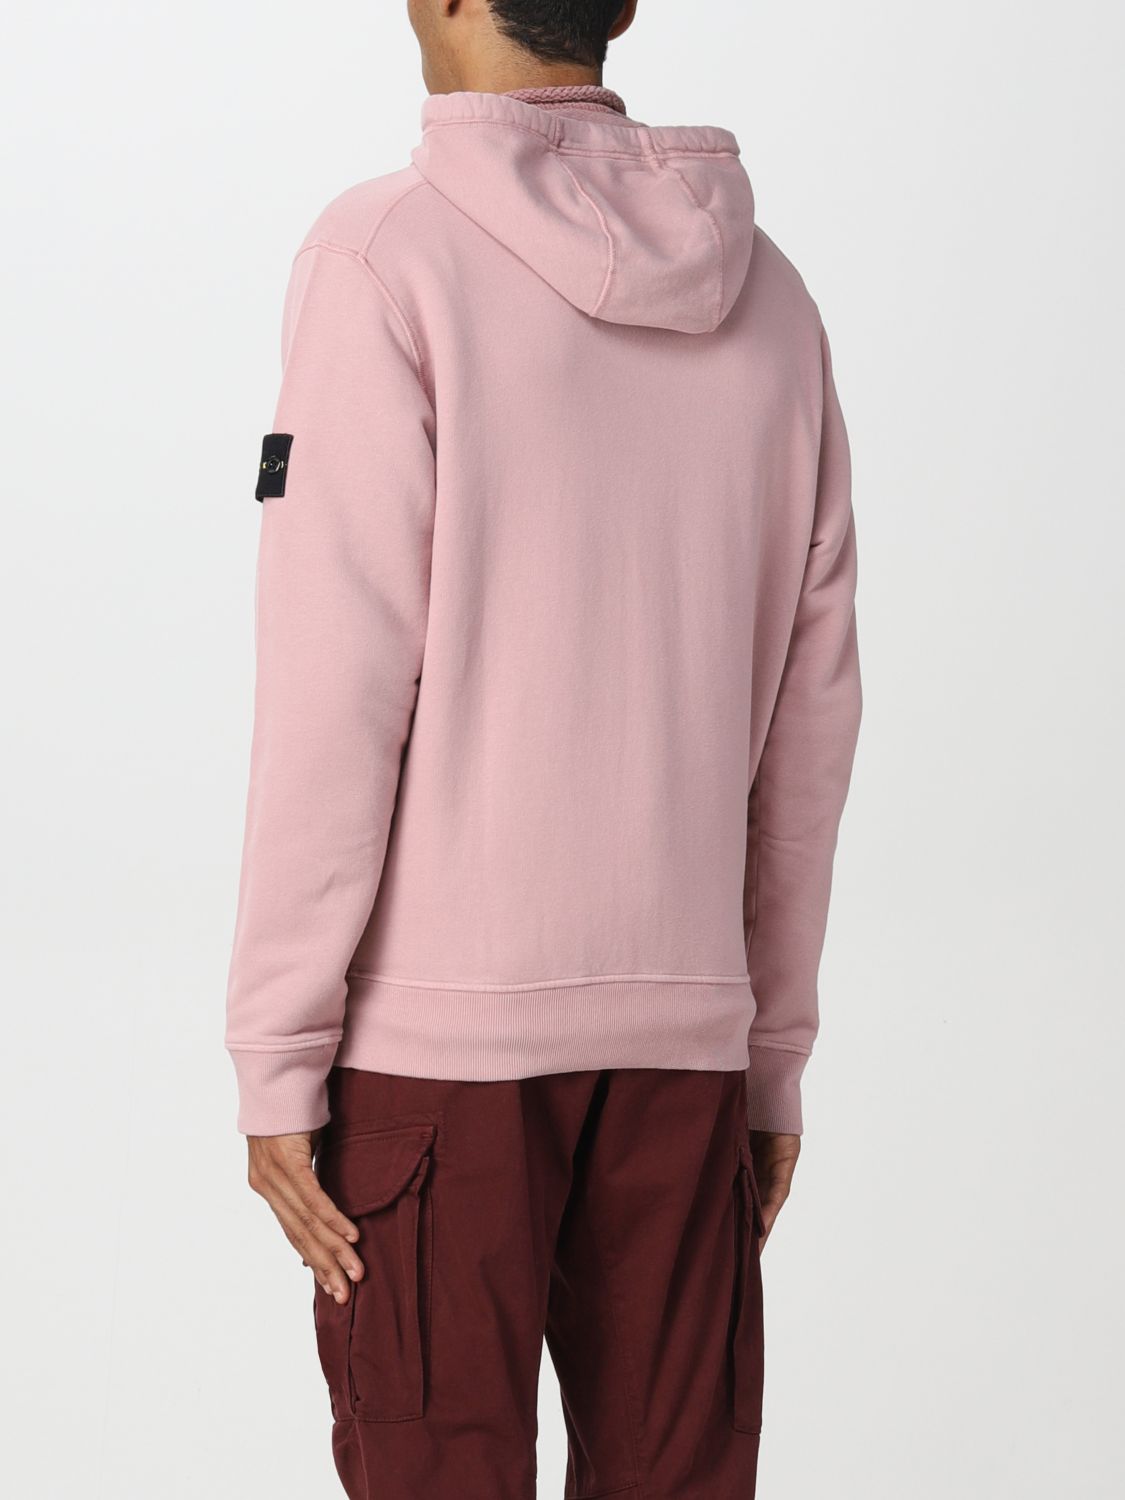 Sweatshirt Stone Island: Stone Island sweatshirt for man pink 2